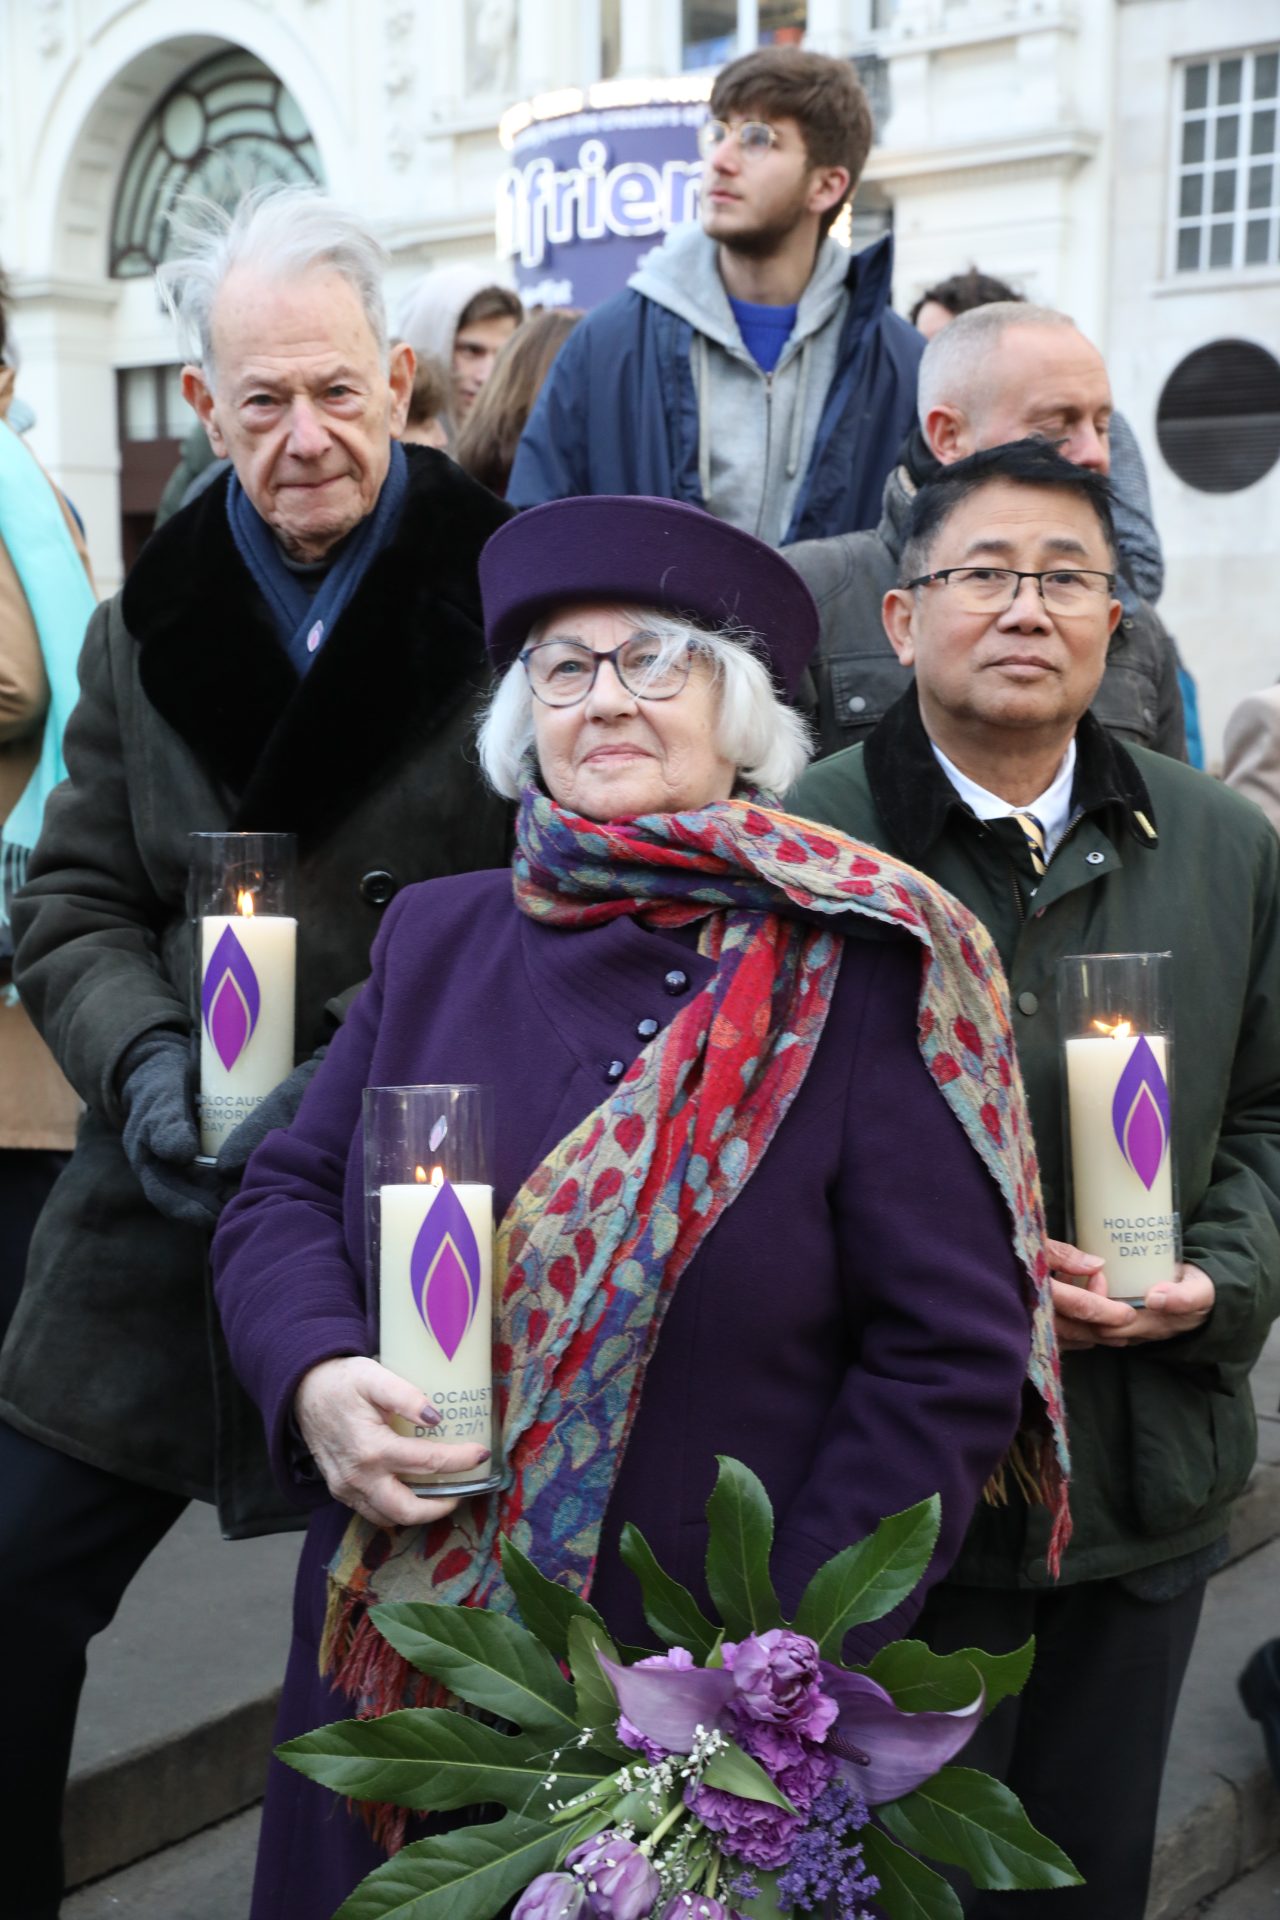 Holocaust survivors Joahn Hajdu MBE and Joan Salter MBE, Light the Darkness in Piccadilly with Sokphal Din BEM, a survivor of the genocide in Cambodia